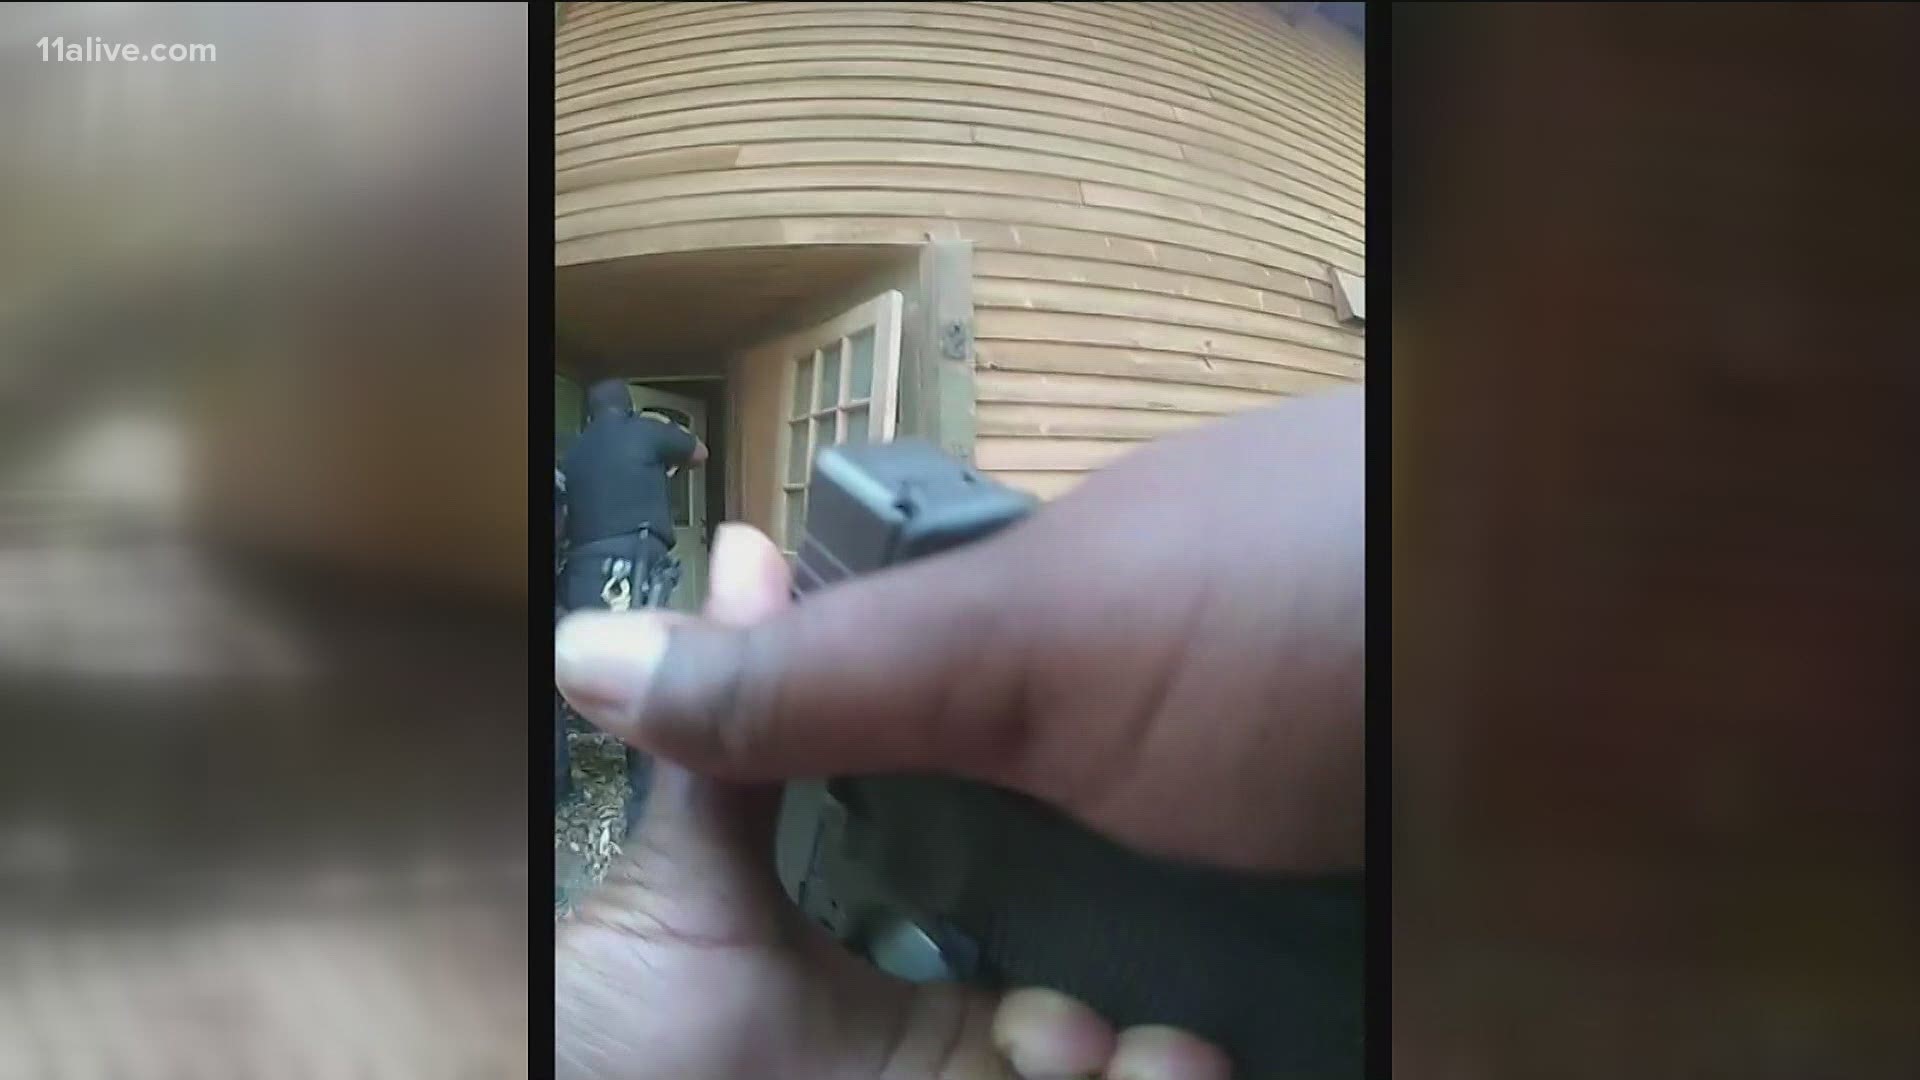 A DeKalb County man was shot and killed in his own home. However, video shows police ask him more than 40 times to drop his weapon.